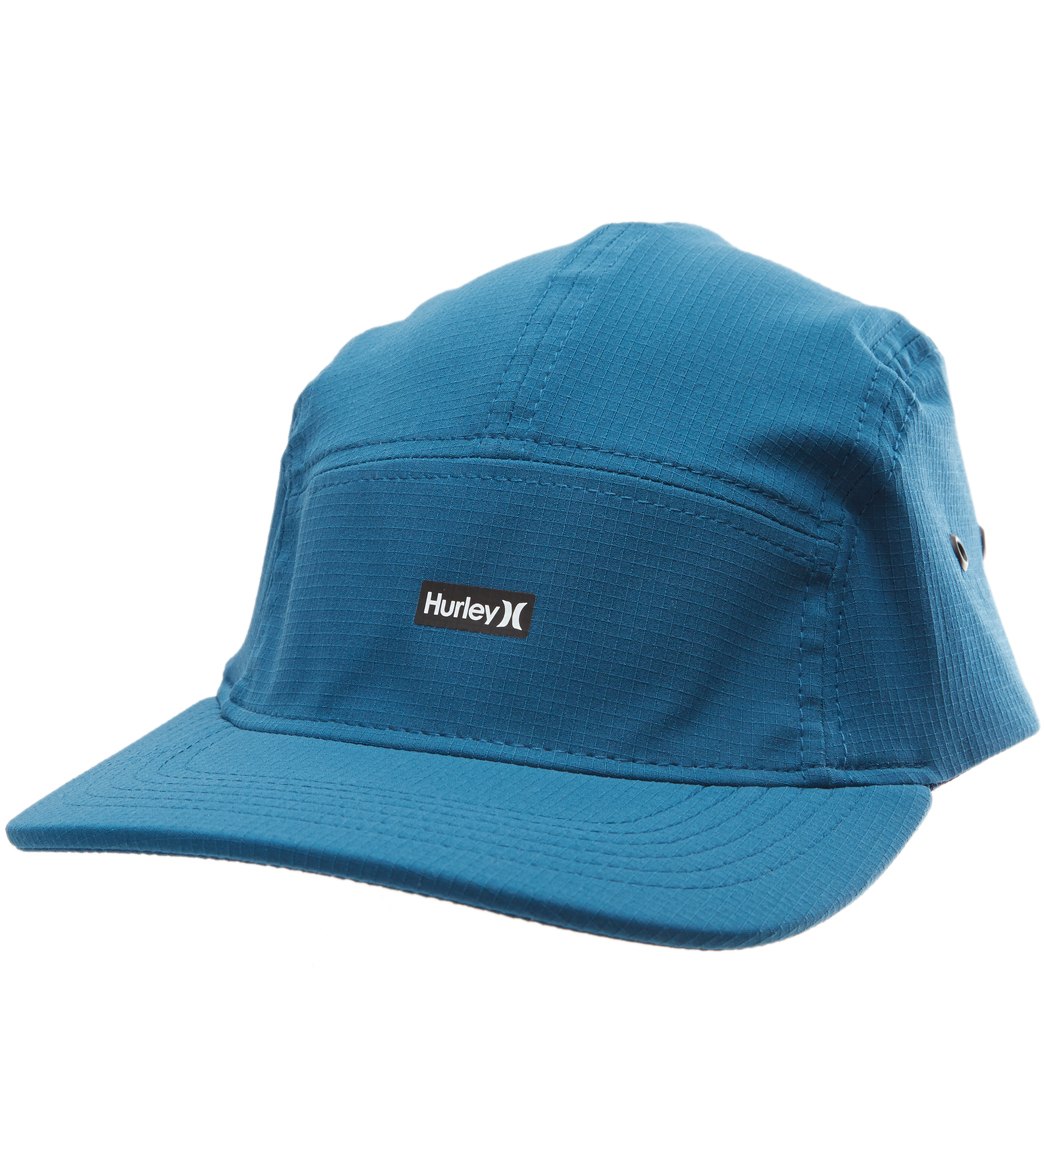 Hurley Women's One and Only Hat at SwimOutlet.com